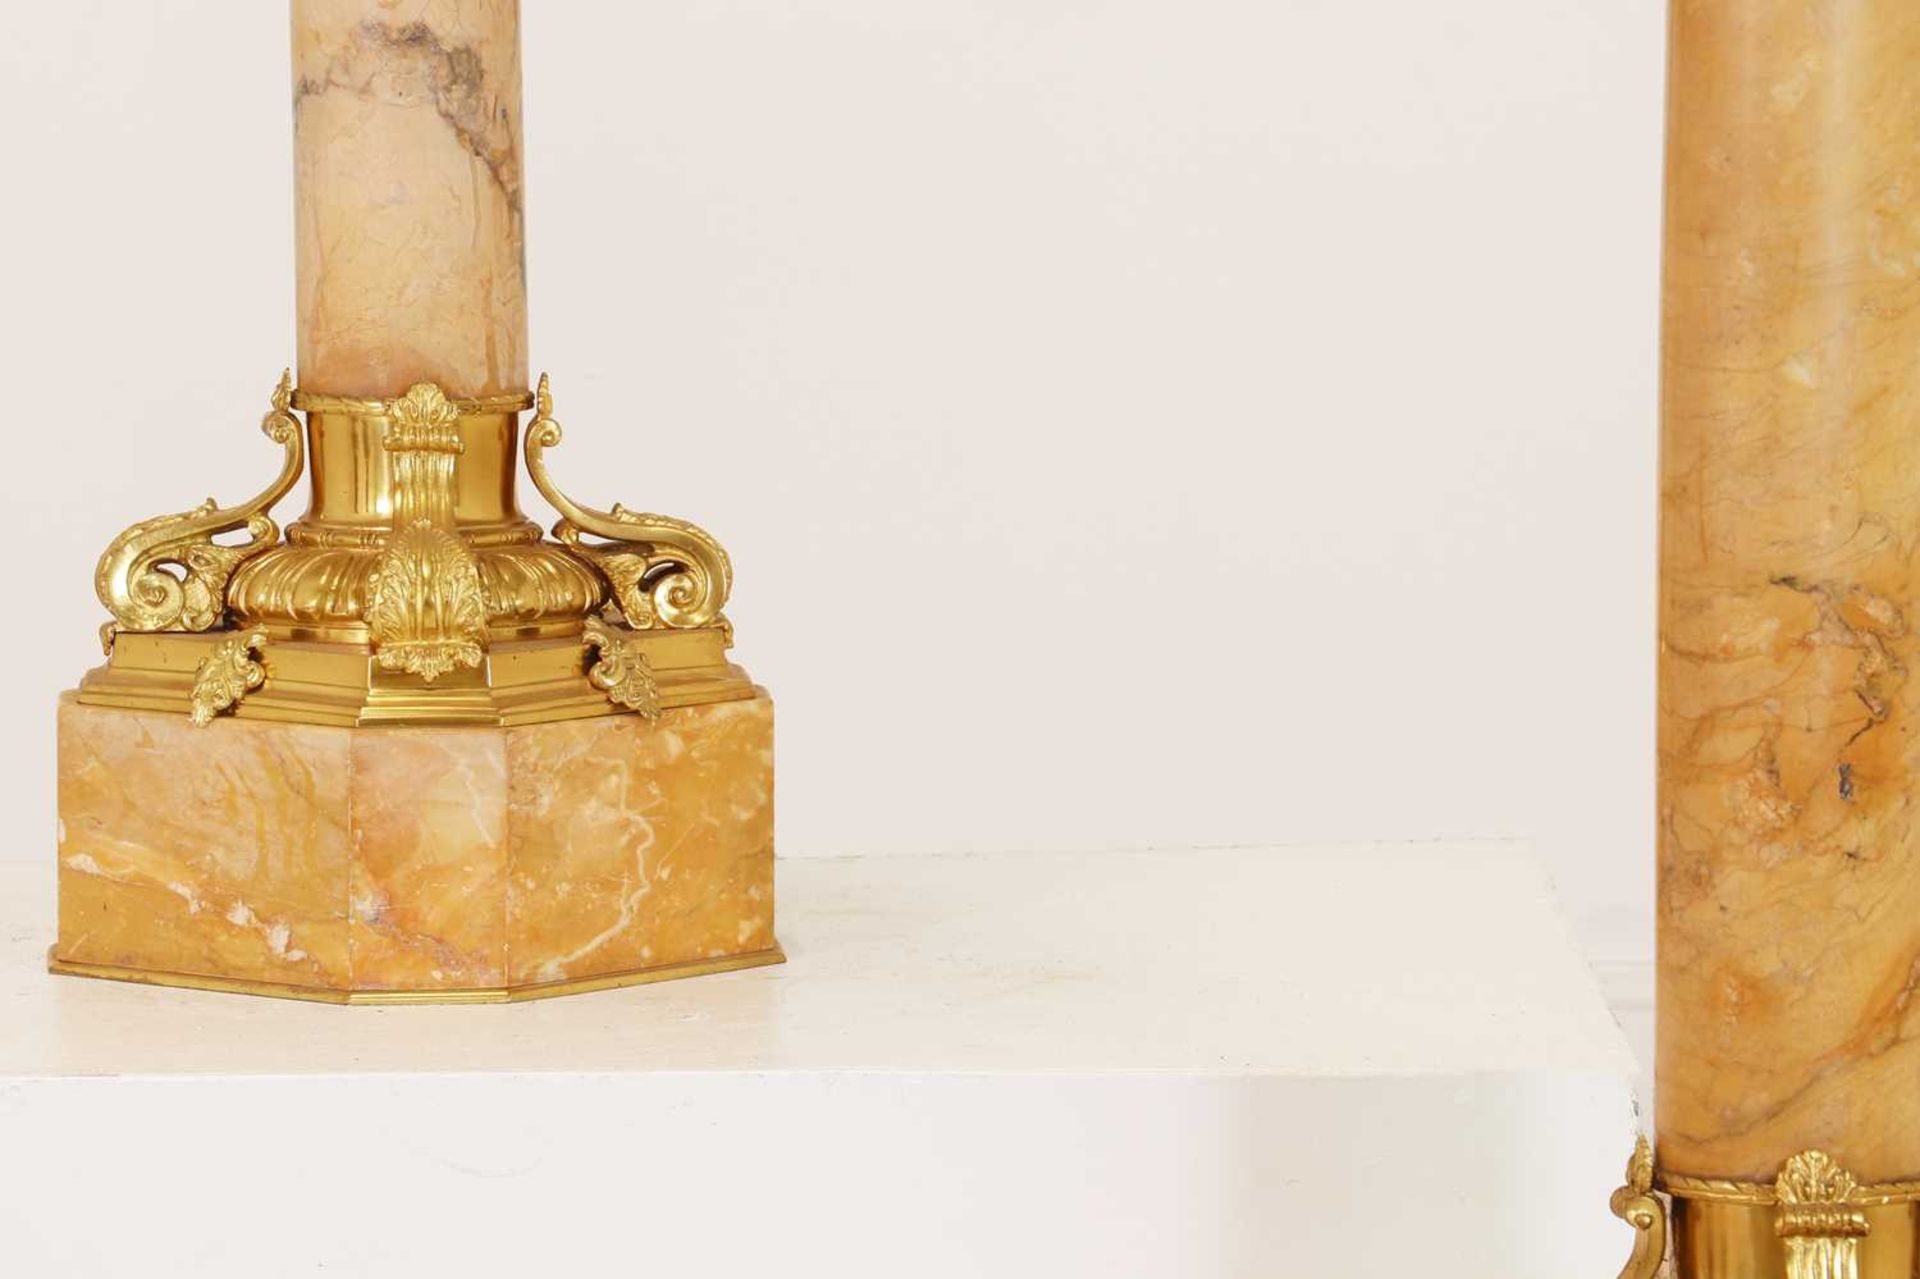 A pair of giallo antico marble pedestals, - Image 6 of 9